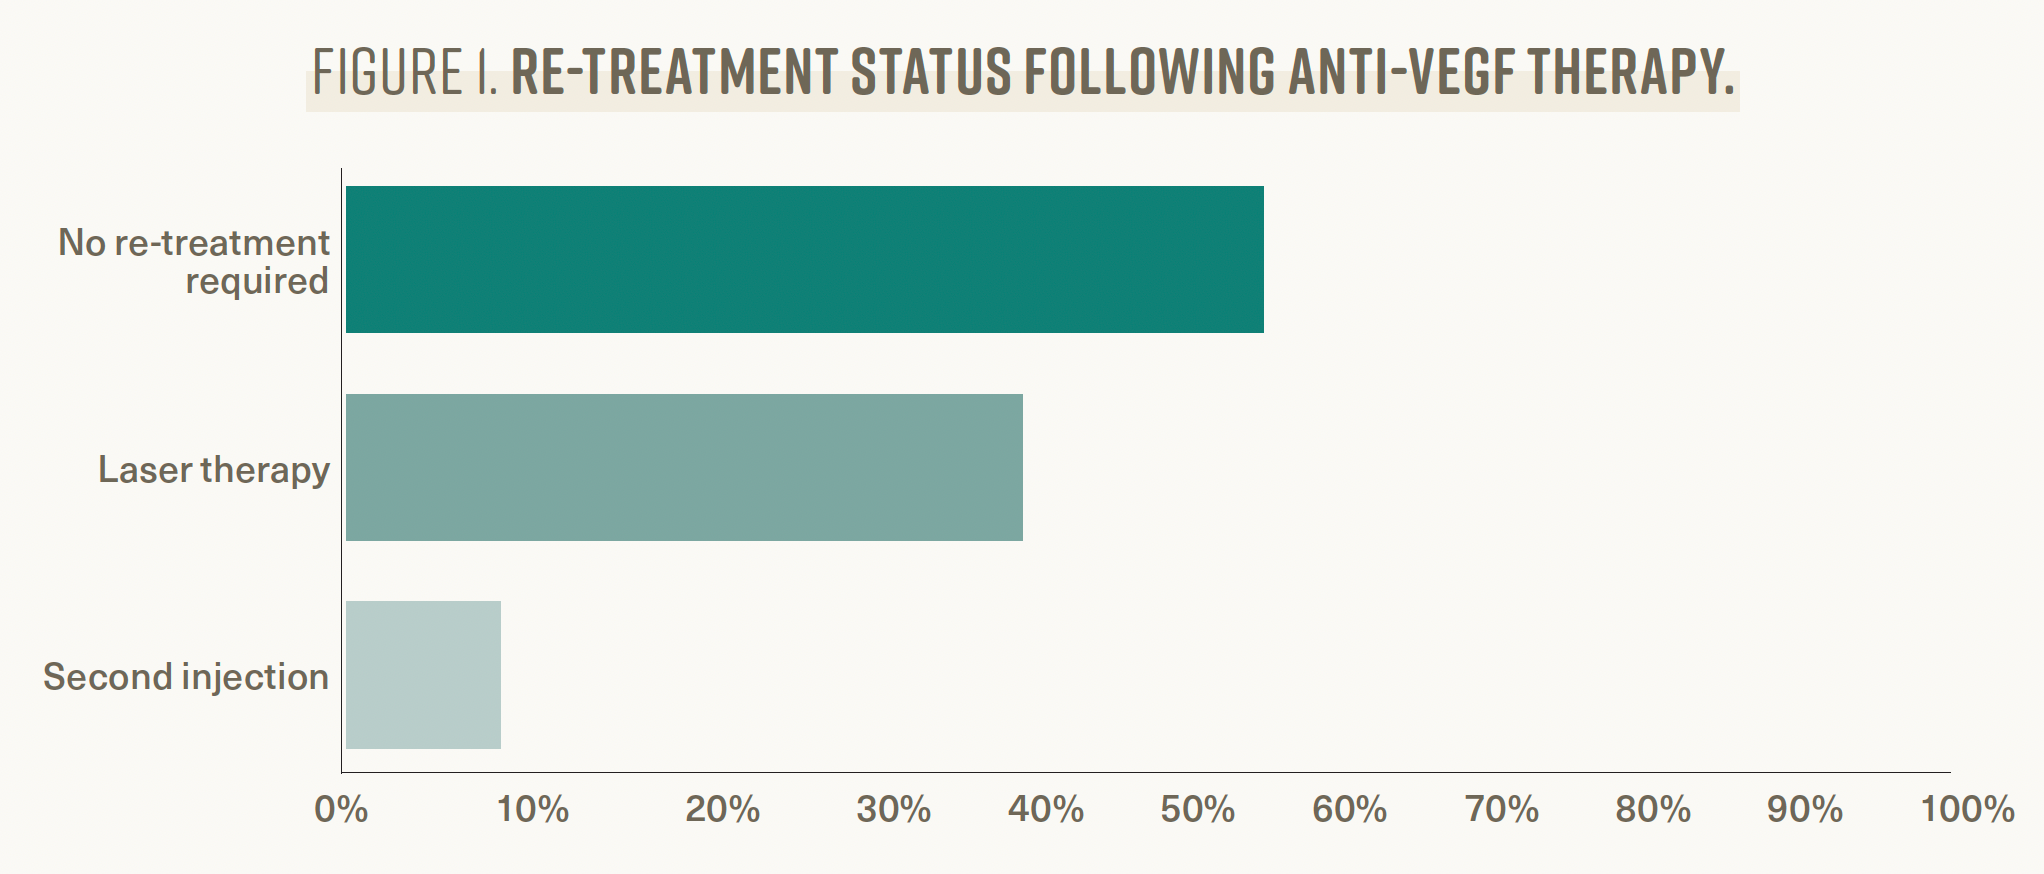 Figure 1 Re-treatment status following anti-vegf therapy